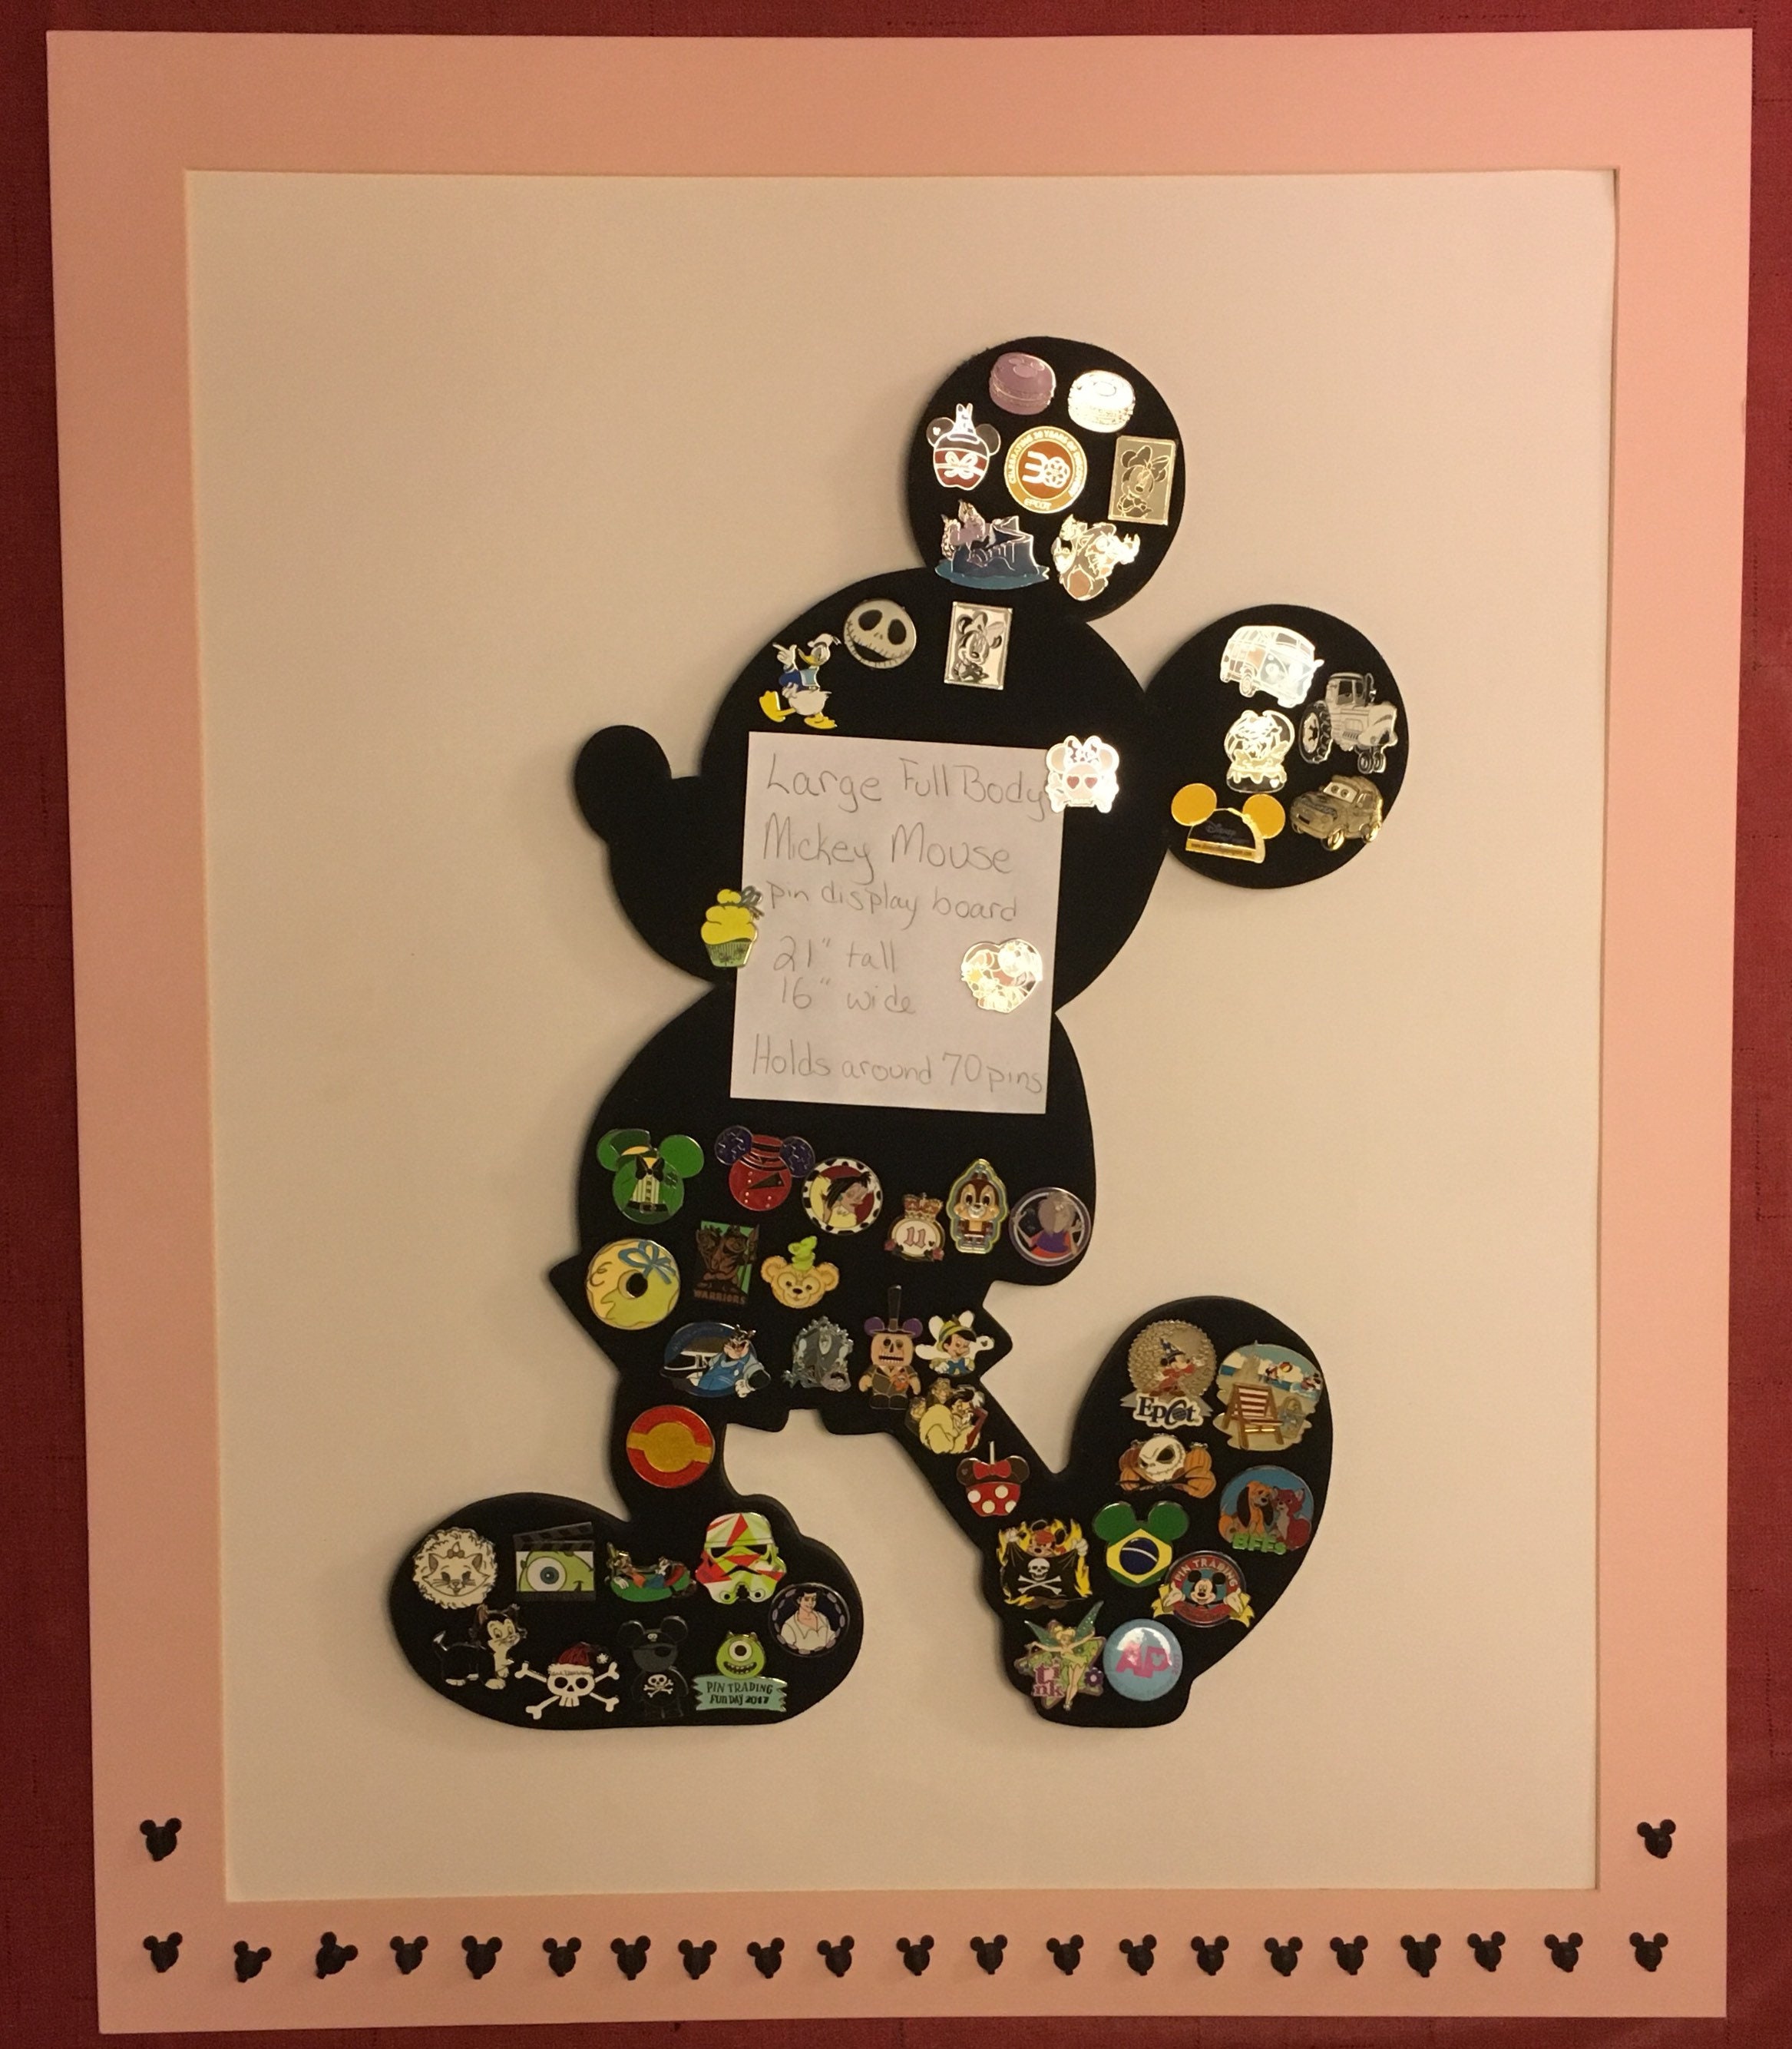 Disney Pin Trading Board. Icon Mickey Mouse Head, 11. Holds Approx